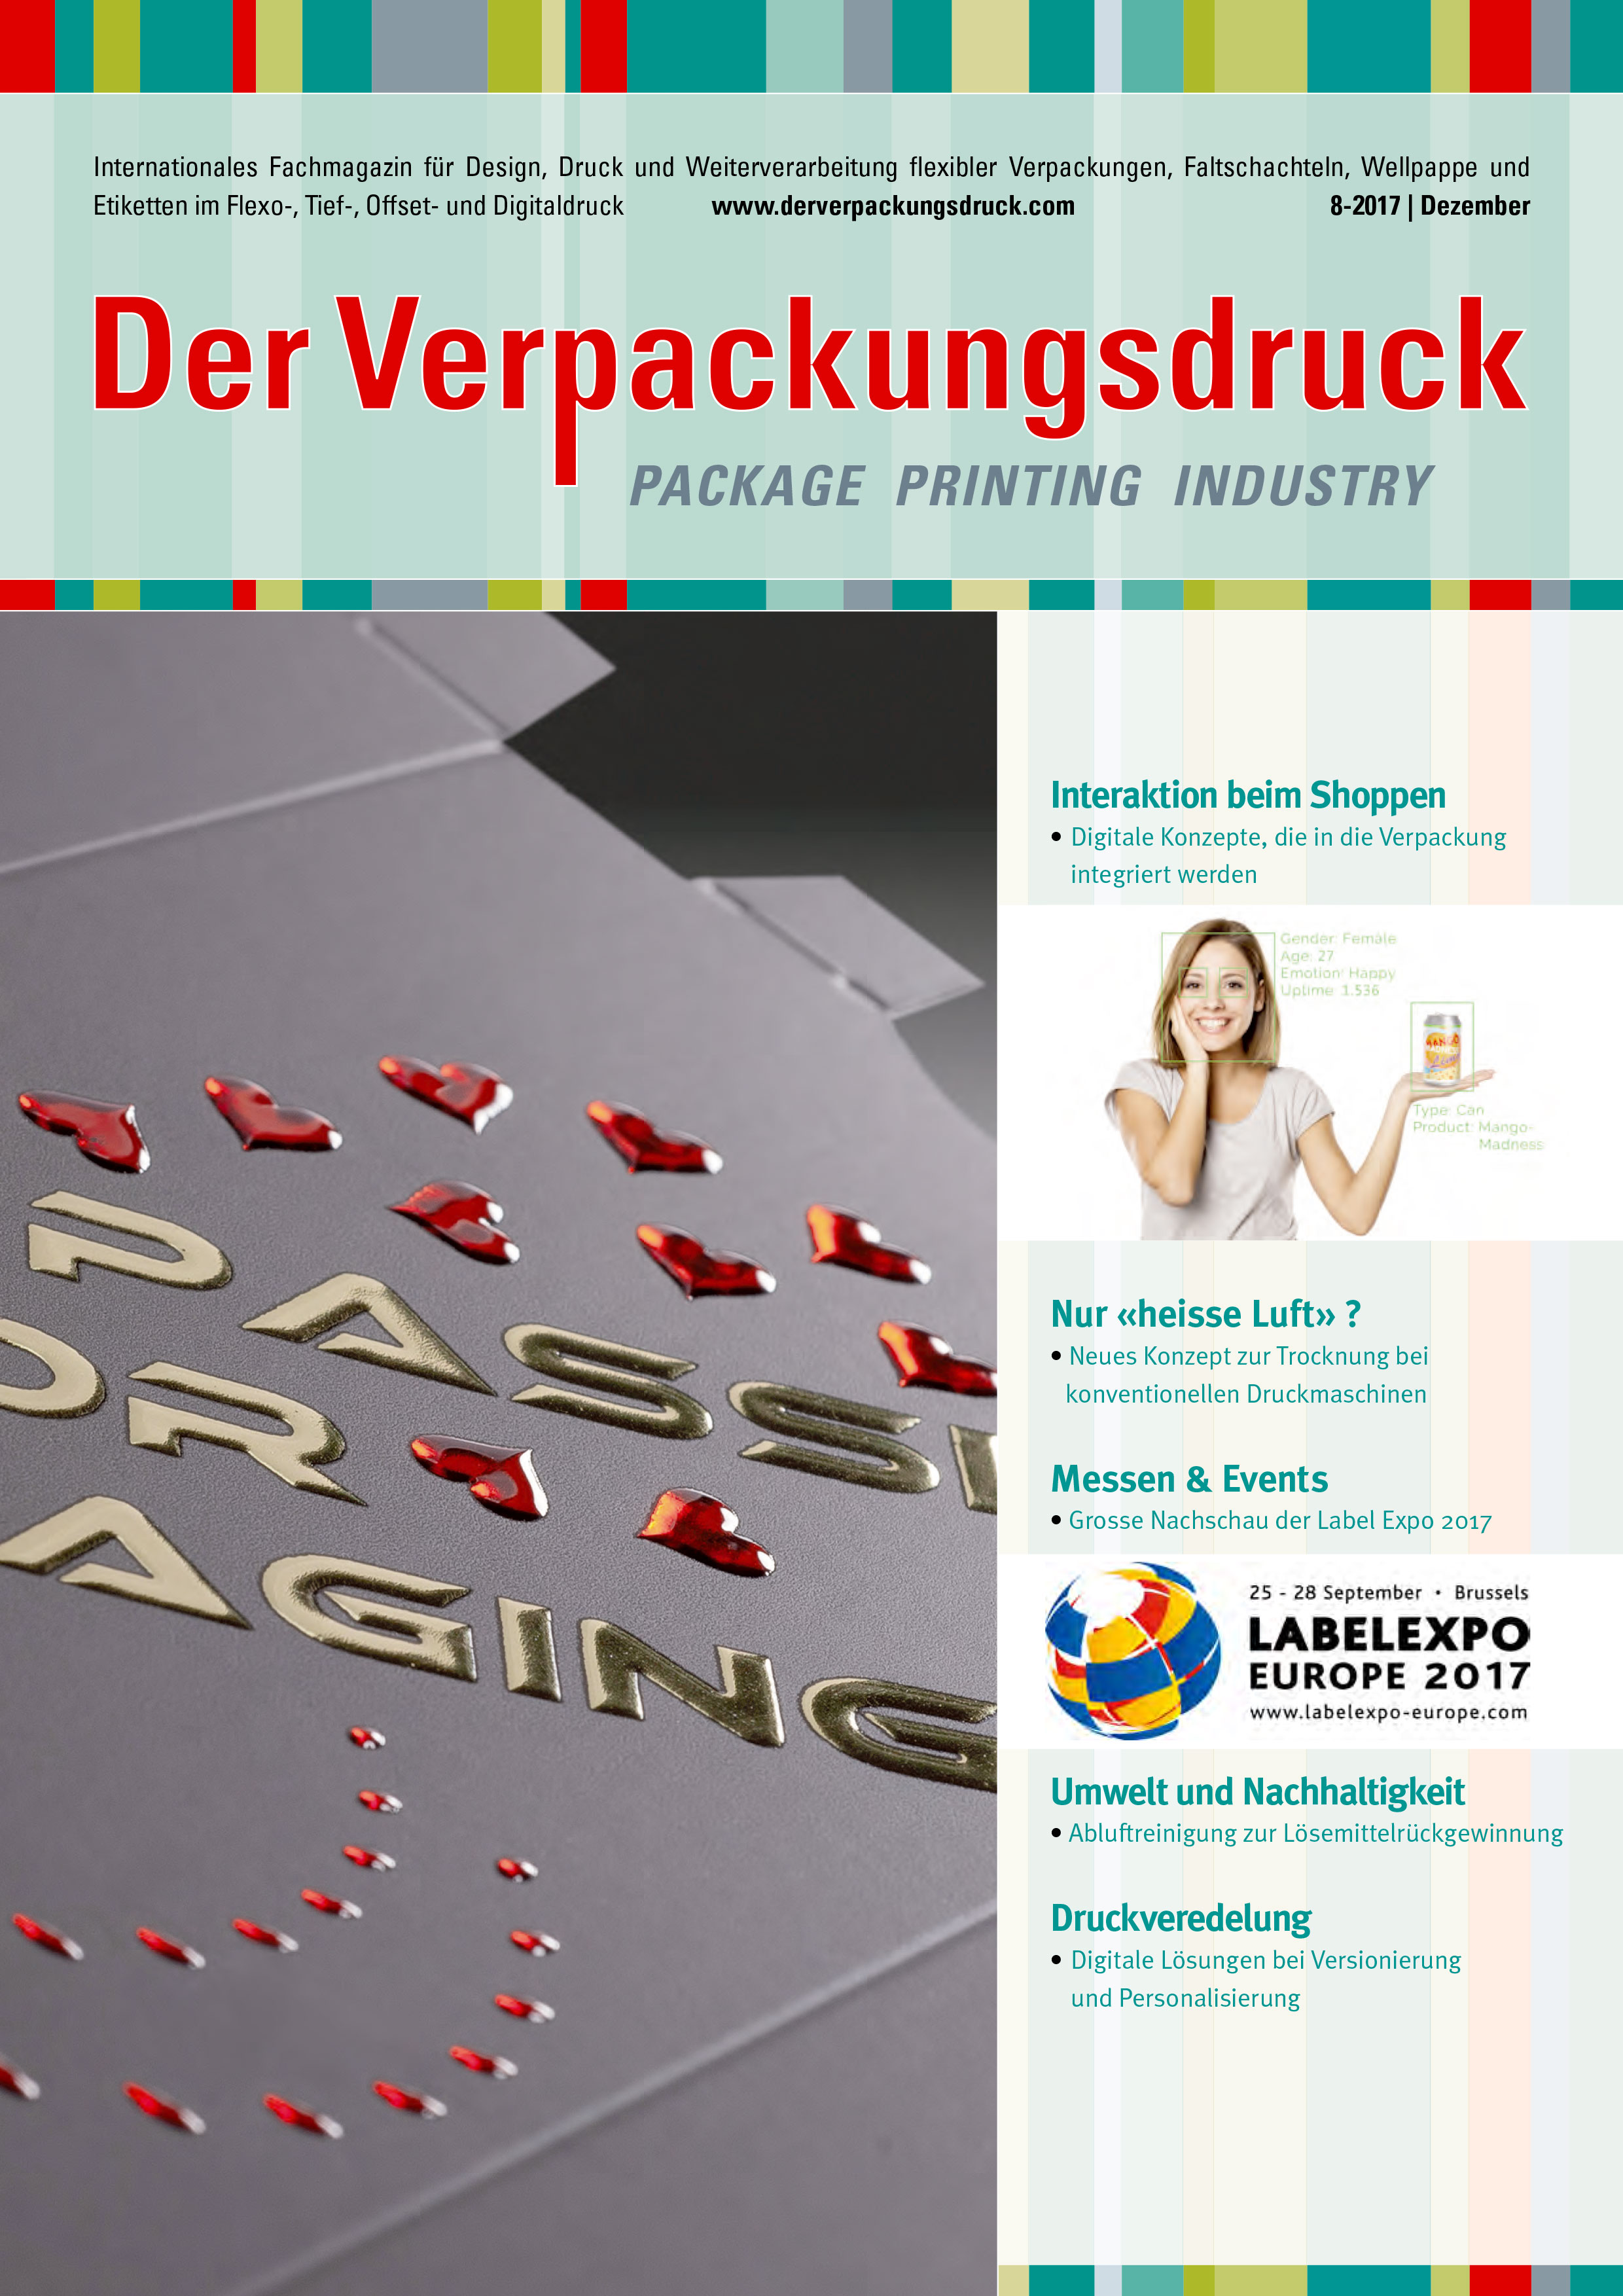 Der Verpackungsdruck Magazine for packaging printing LabelExpo